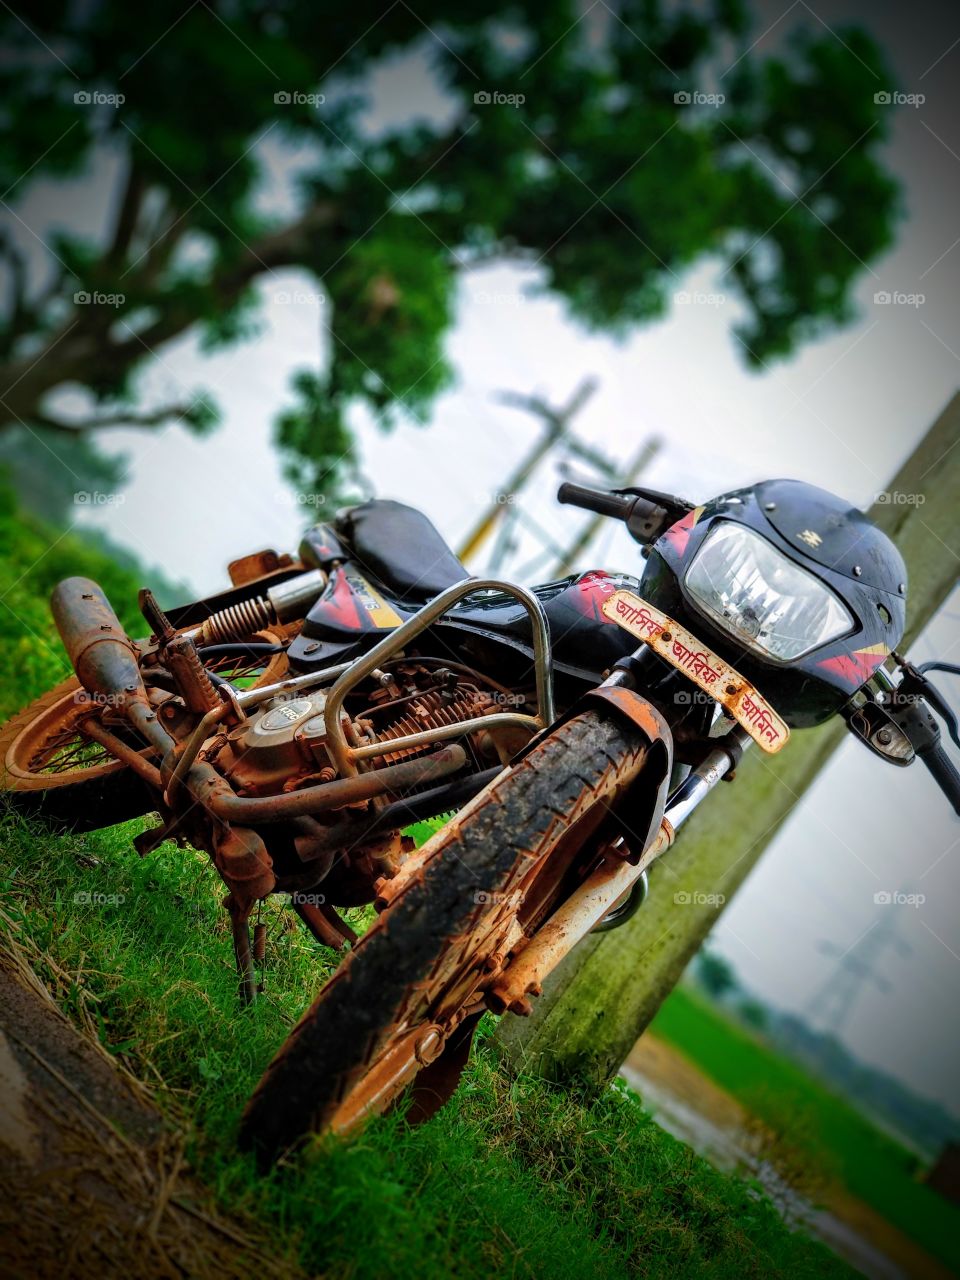 this is my old bike,in my village only I captured this photo. it's really awesome.